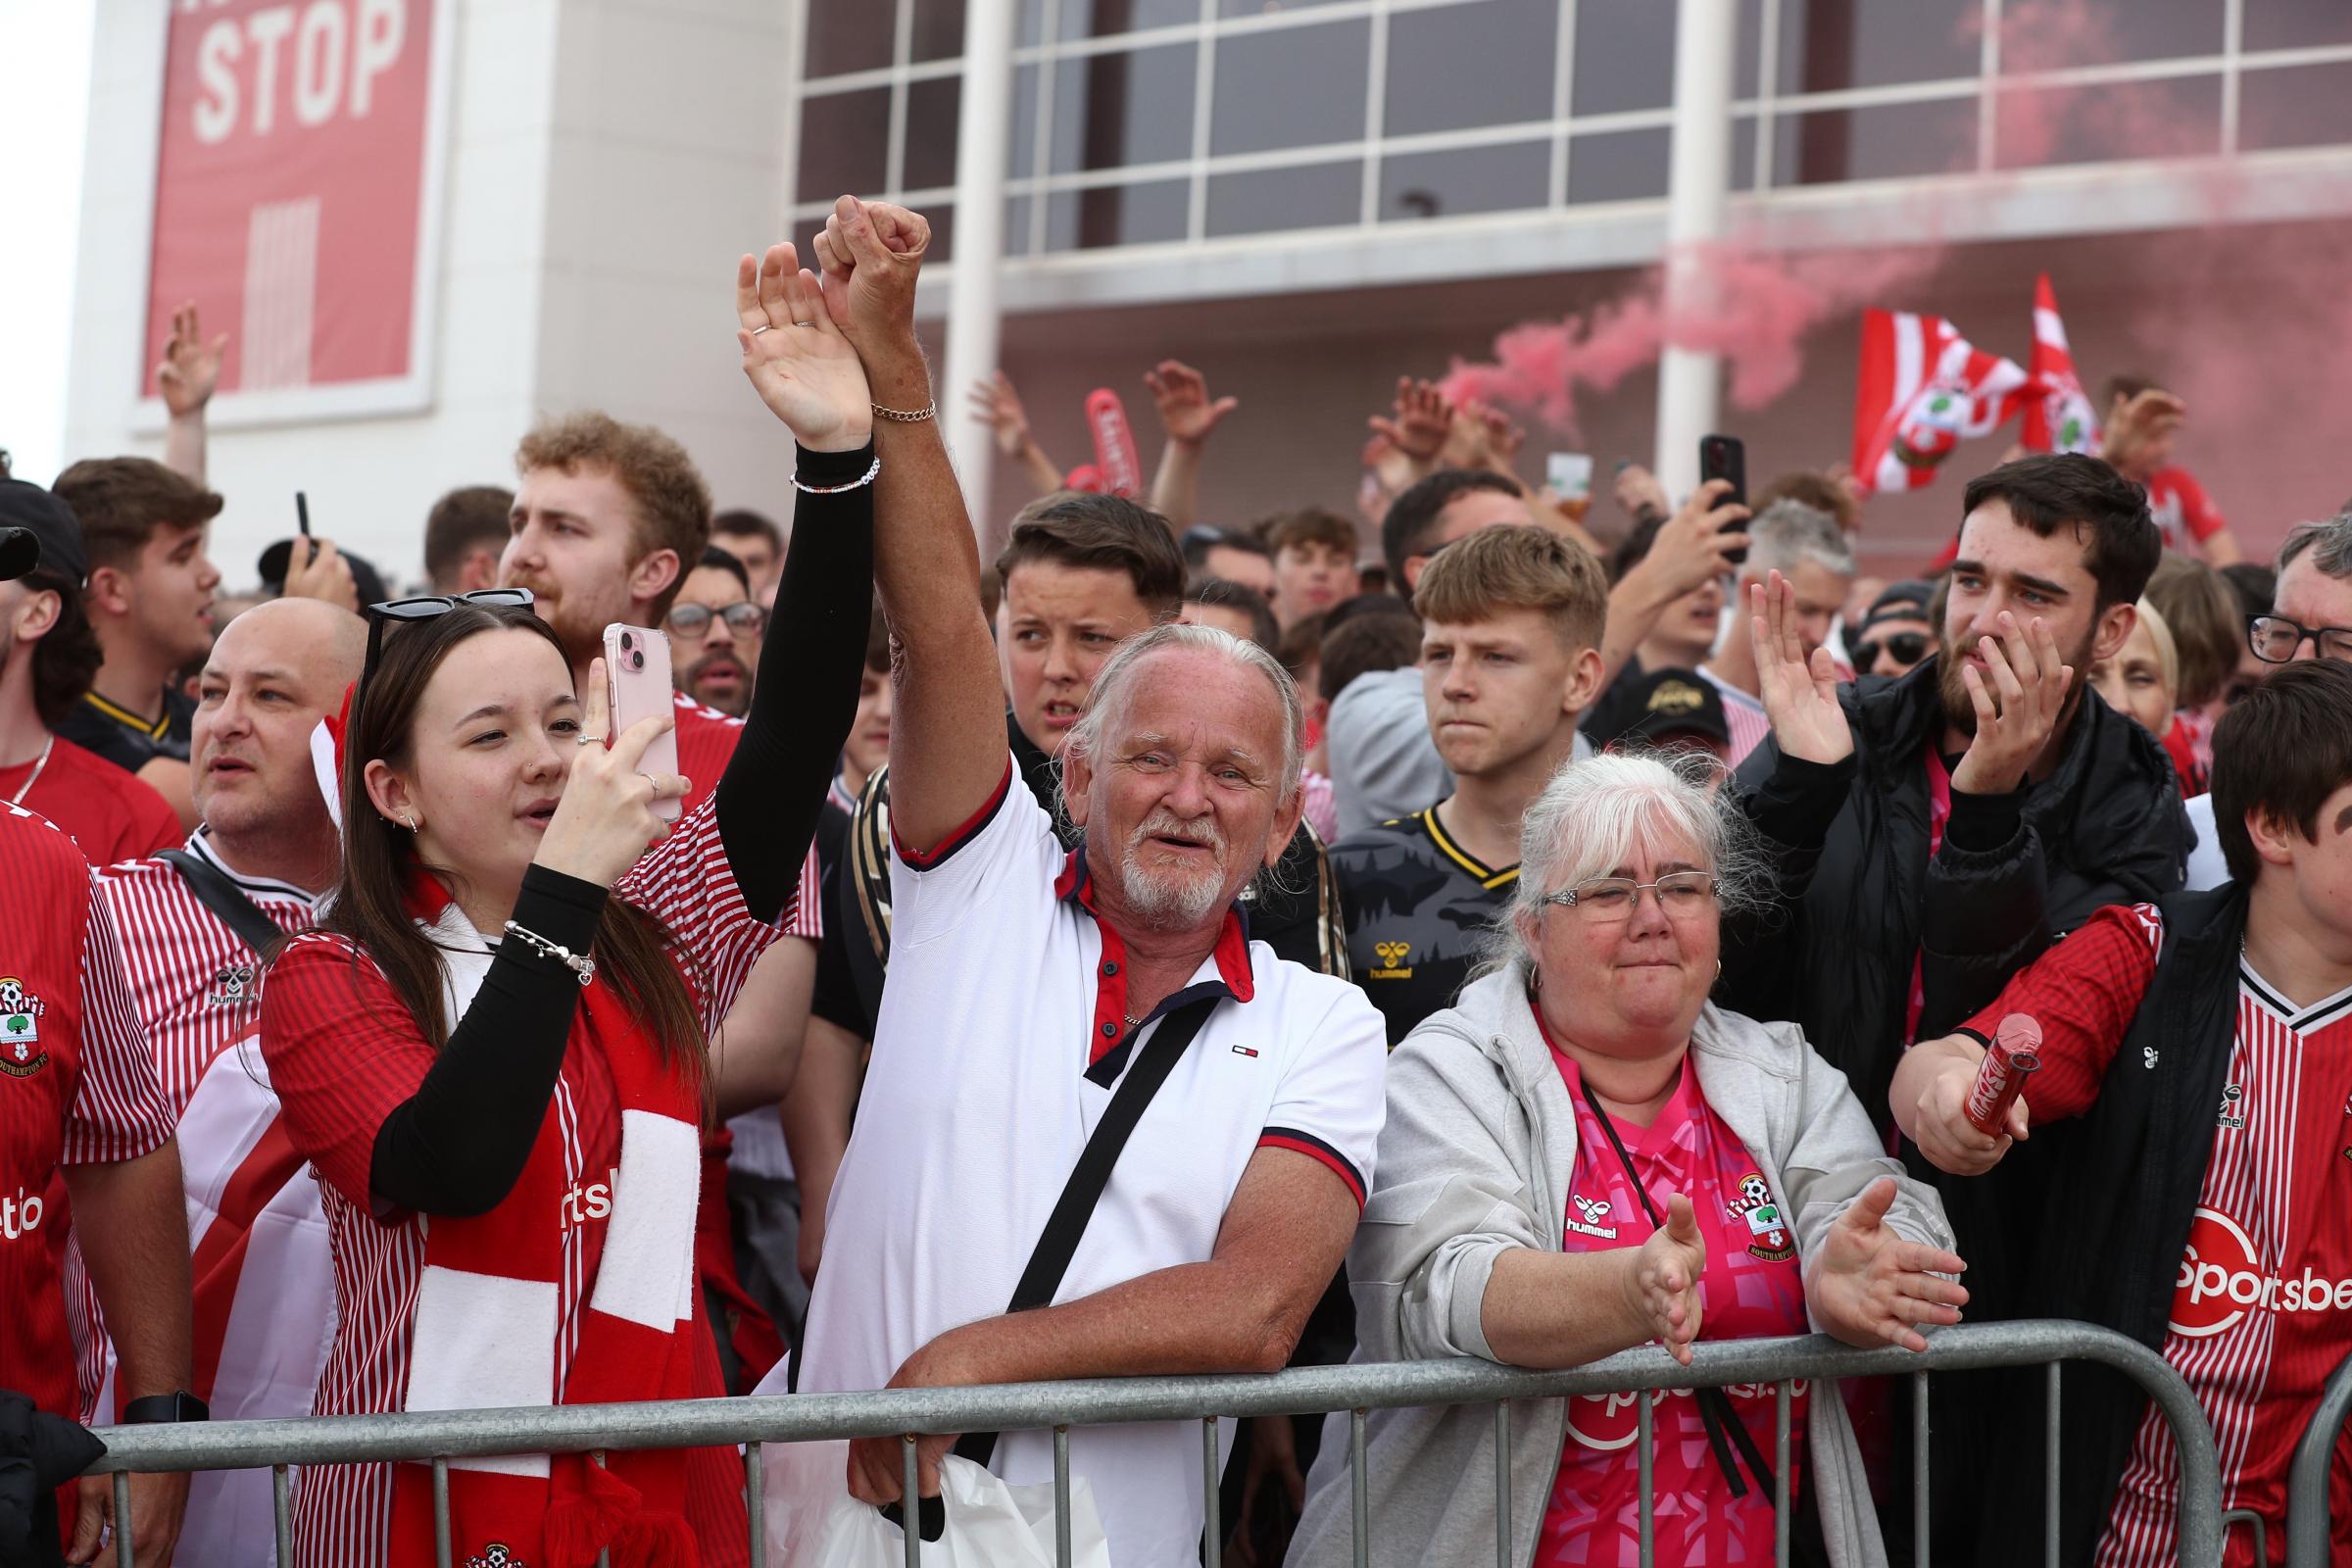 Southampton sell out home first home game of Premier League season